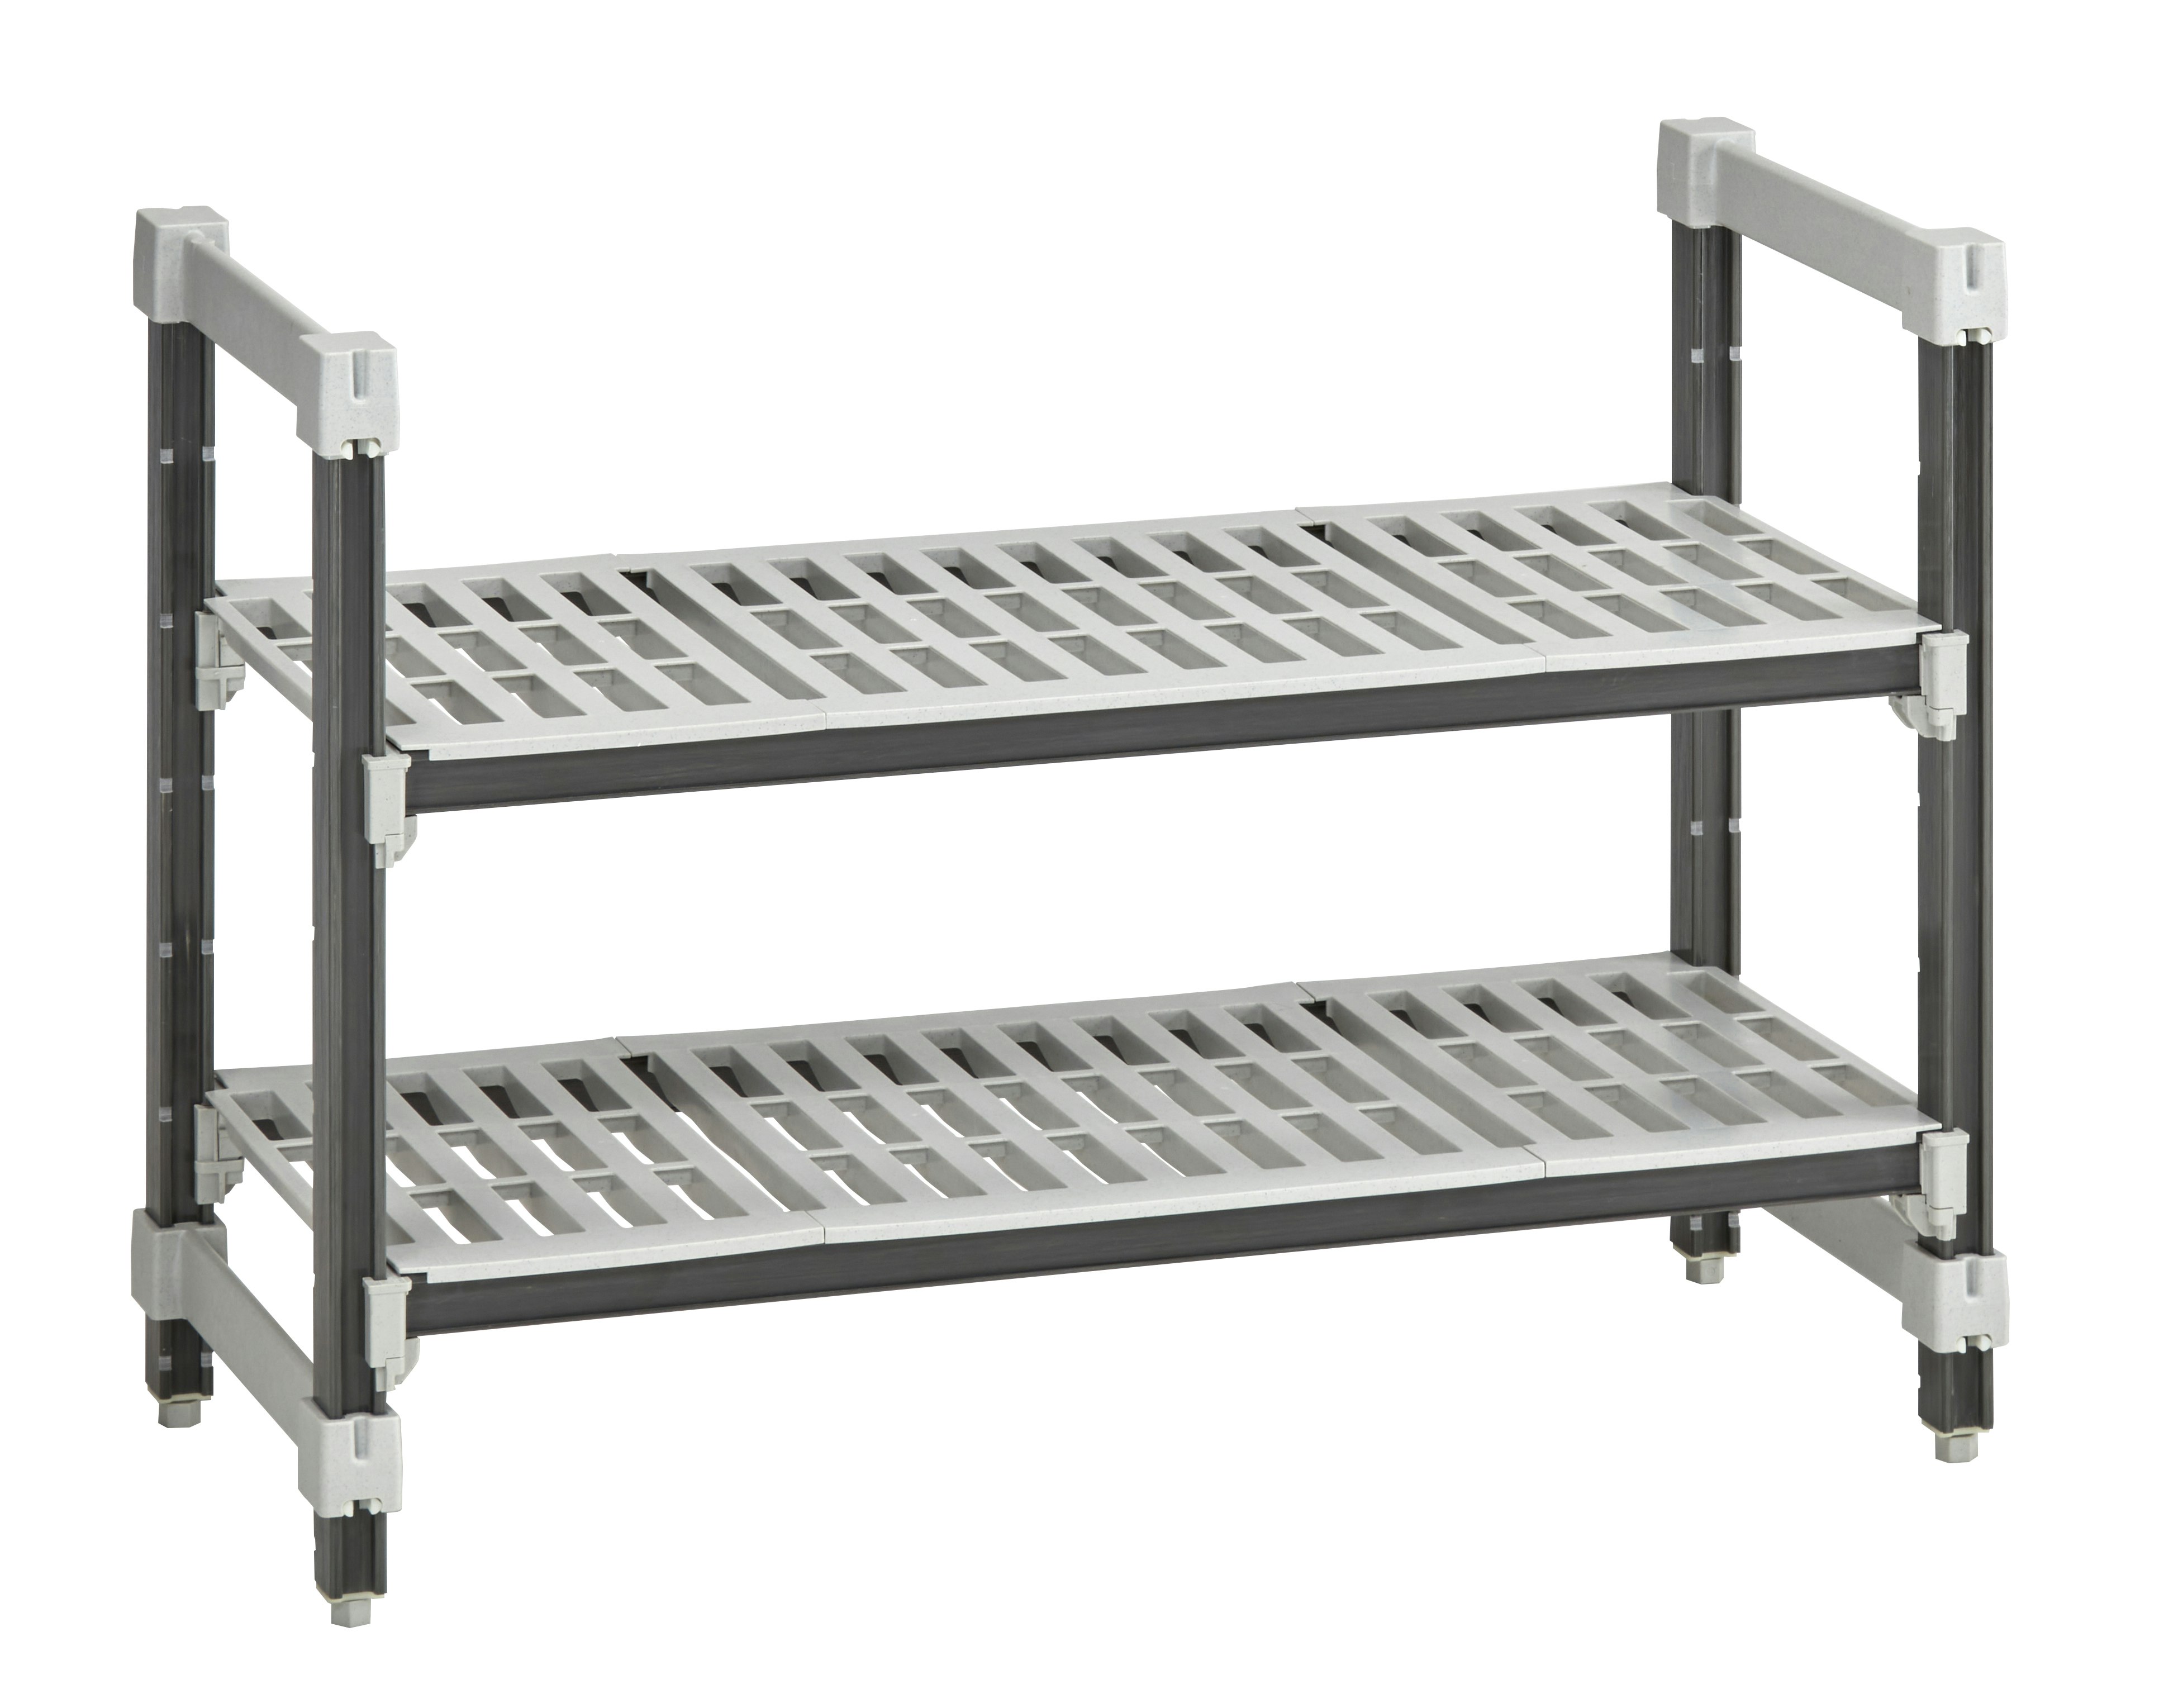 2 x 25 Gallon, Imprinted Stainless Steel Station